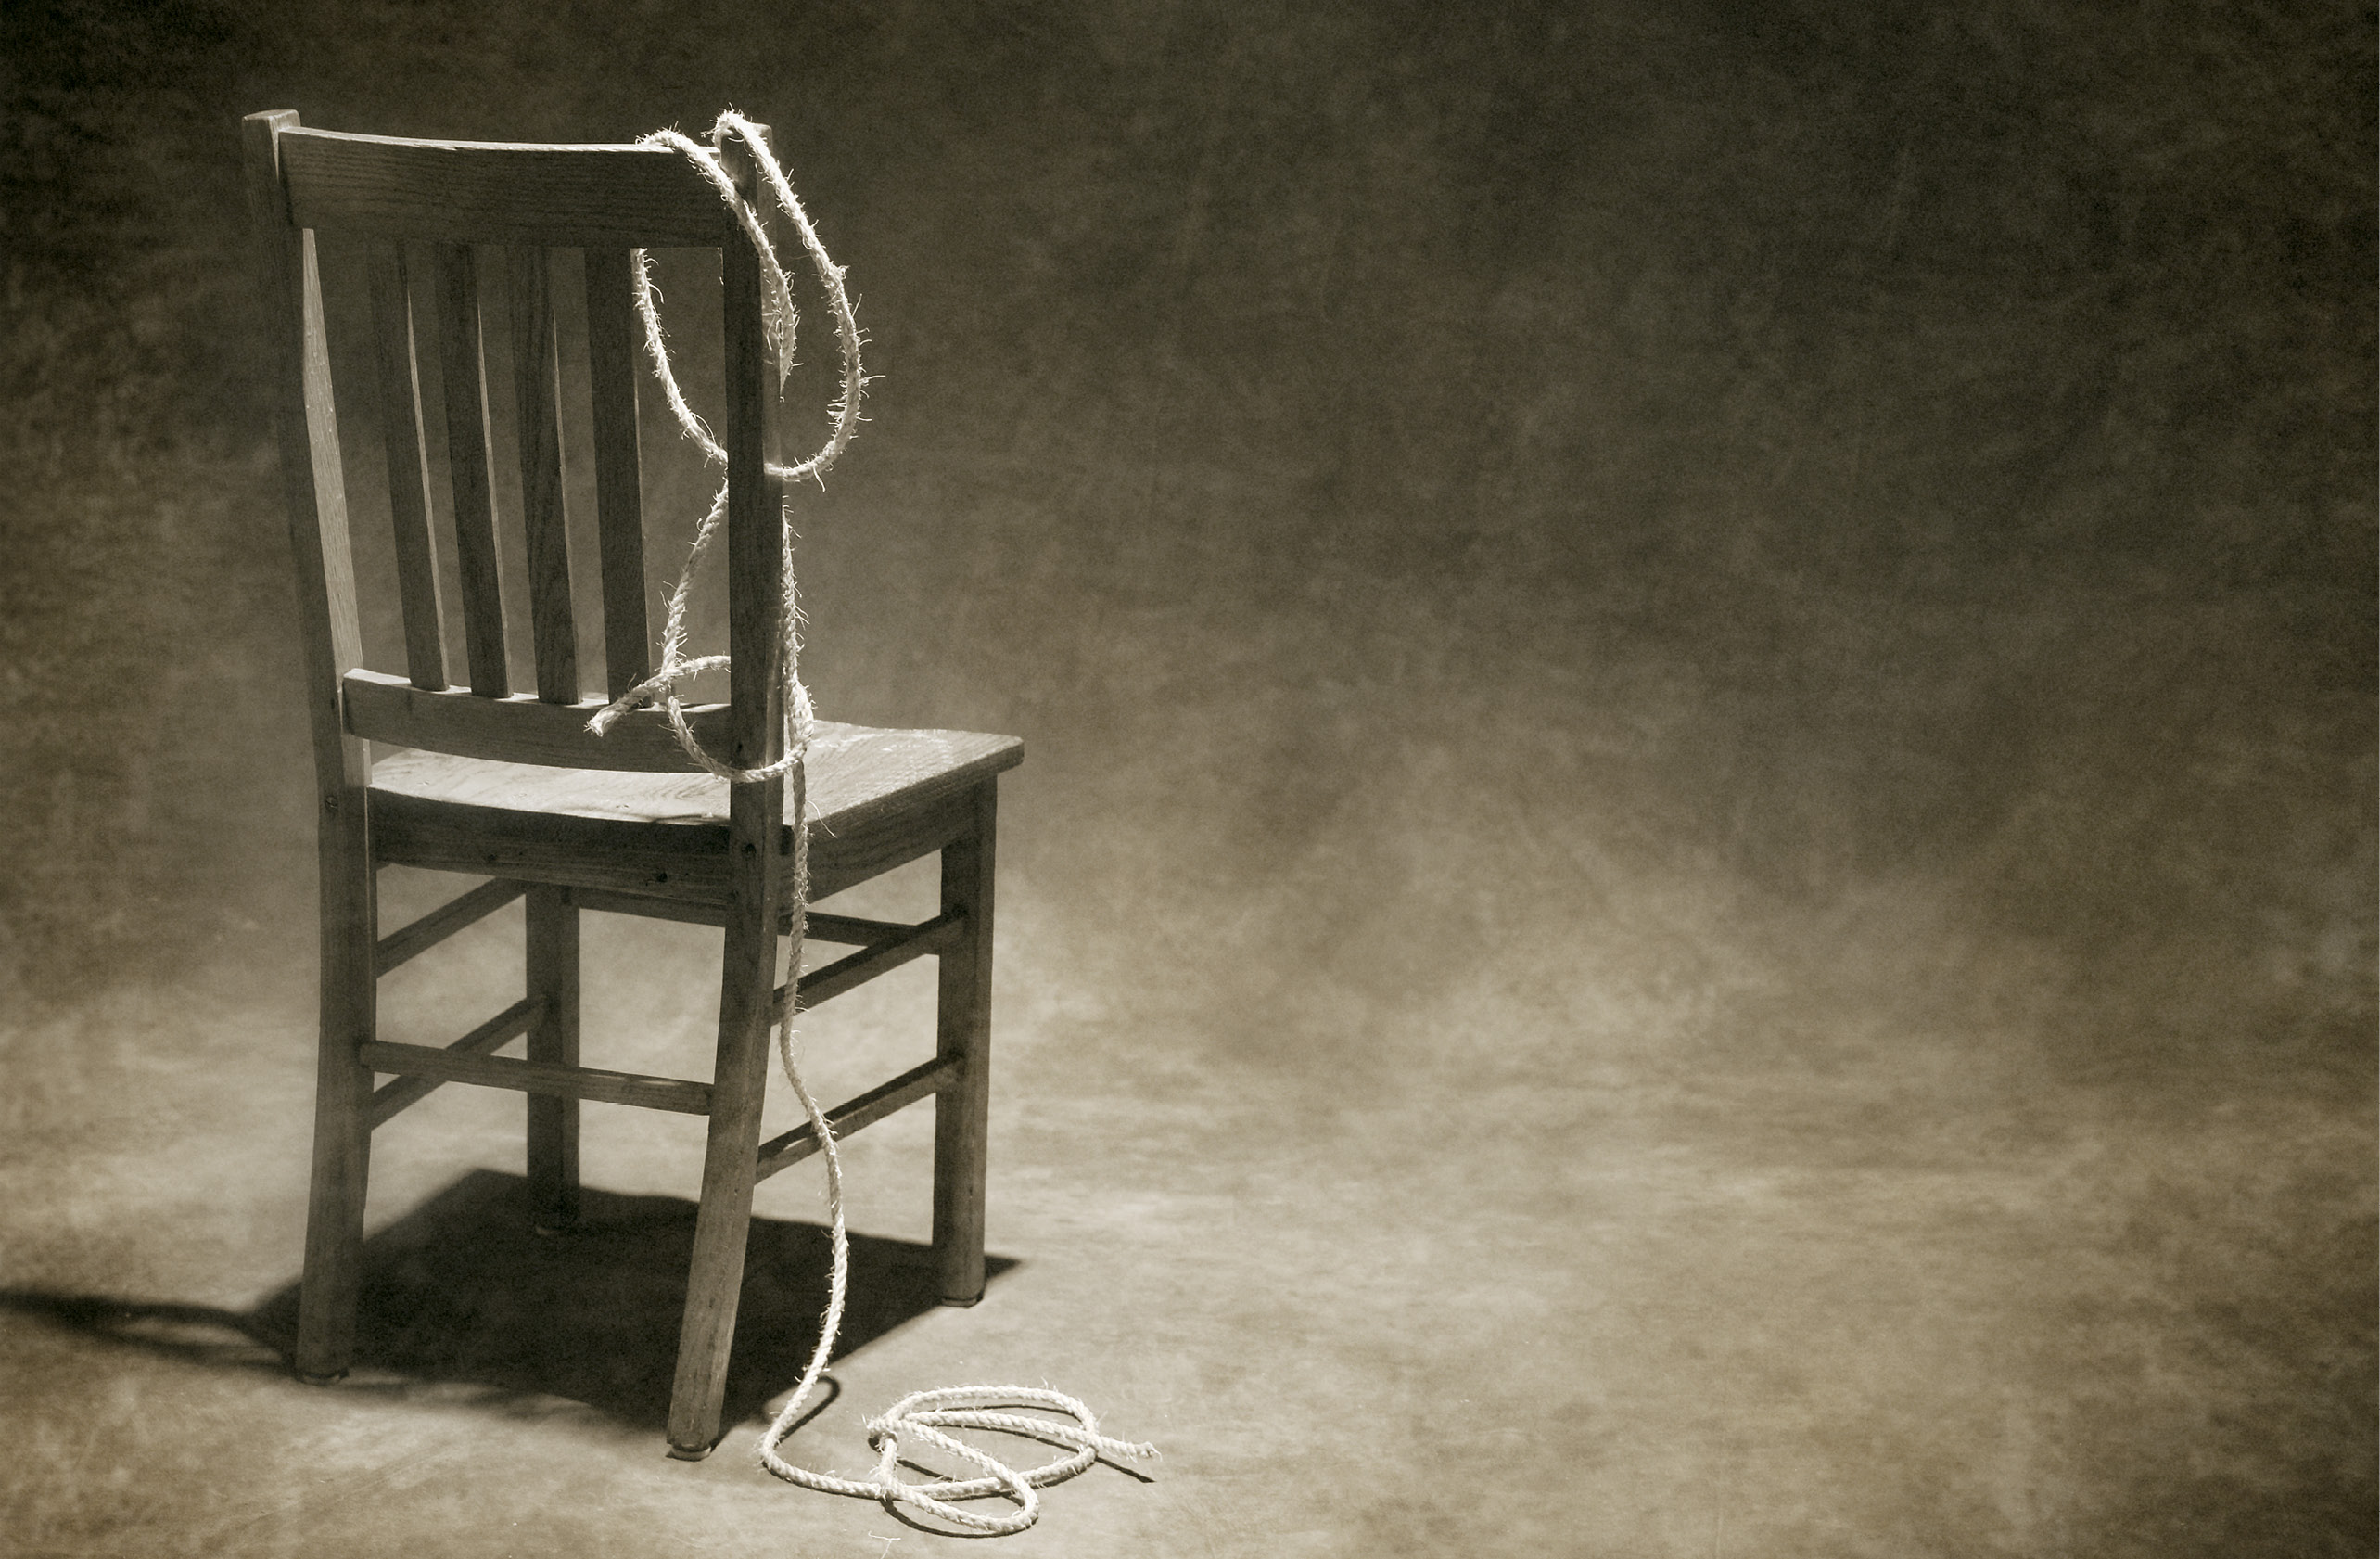 photo of a chair and rope